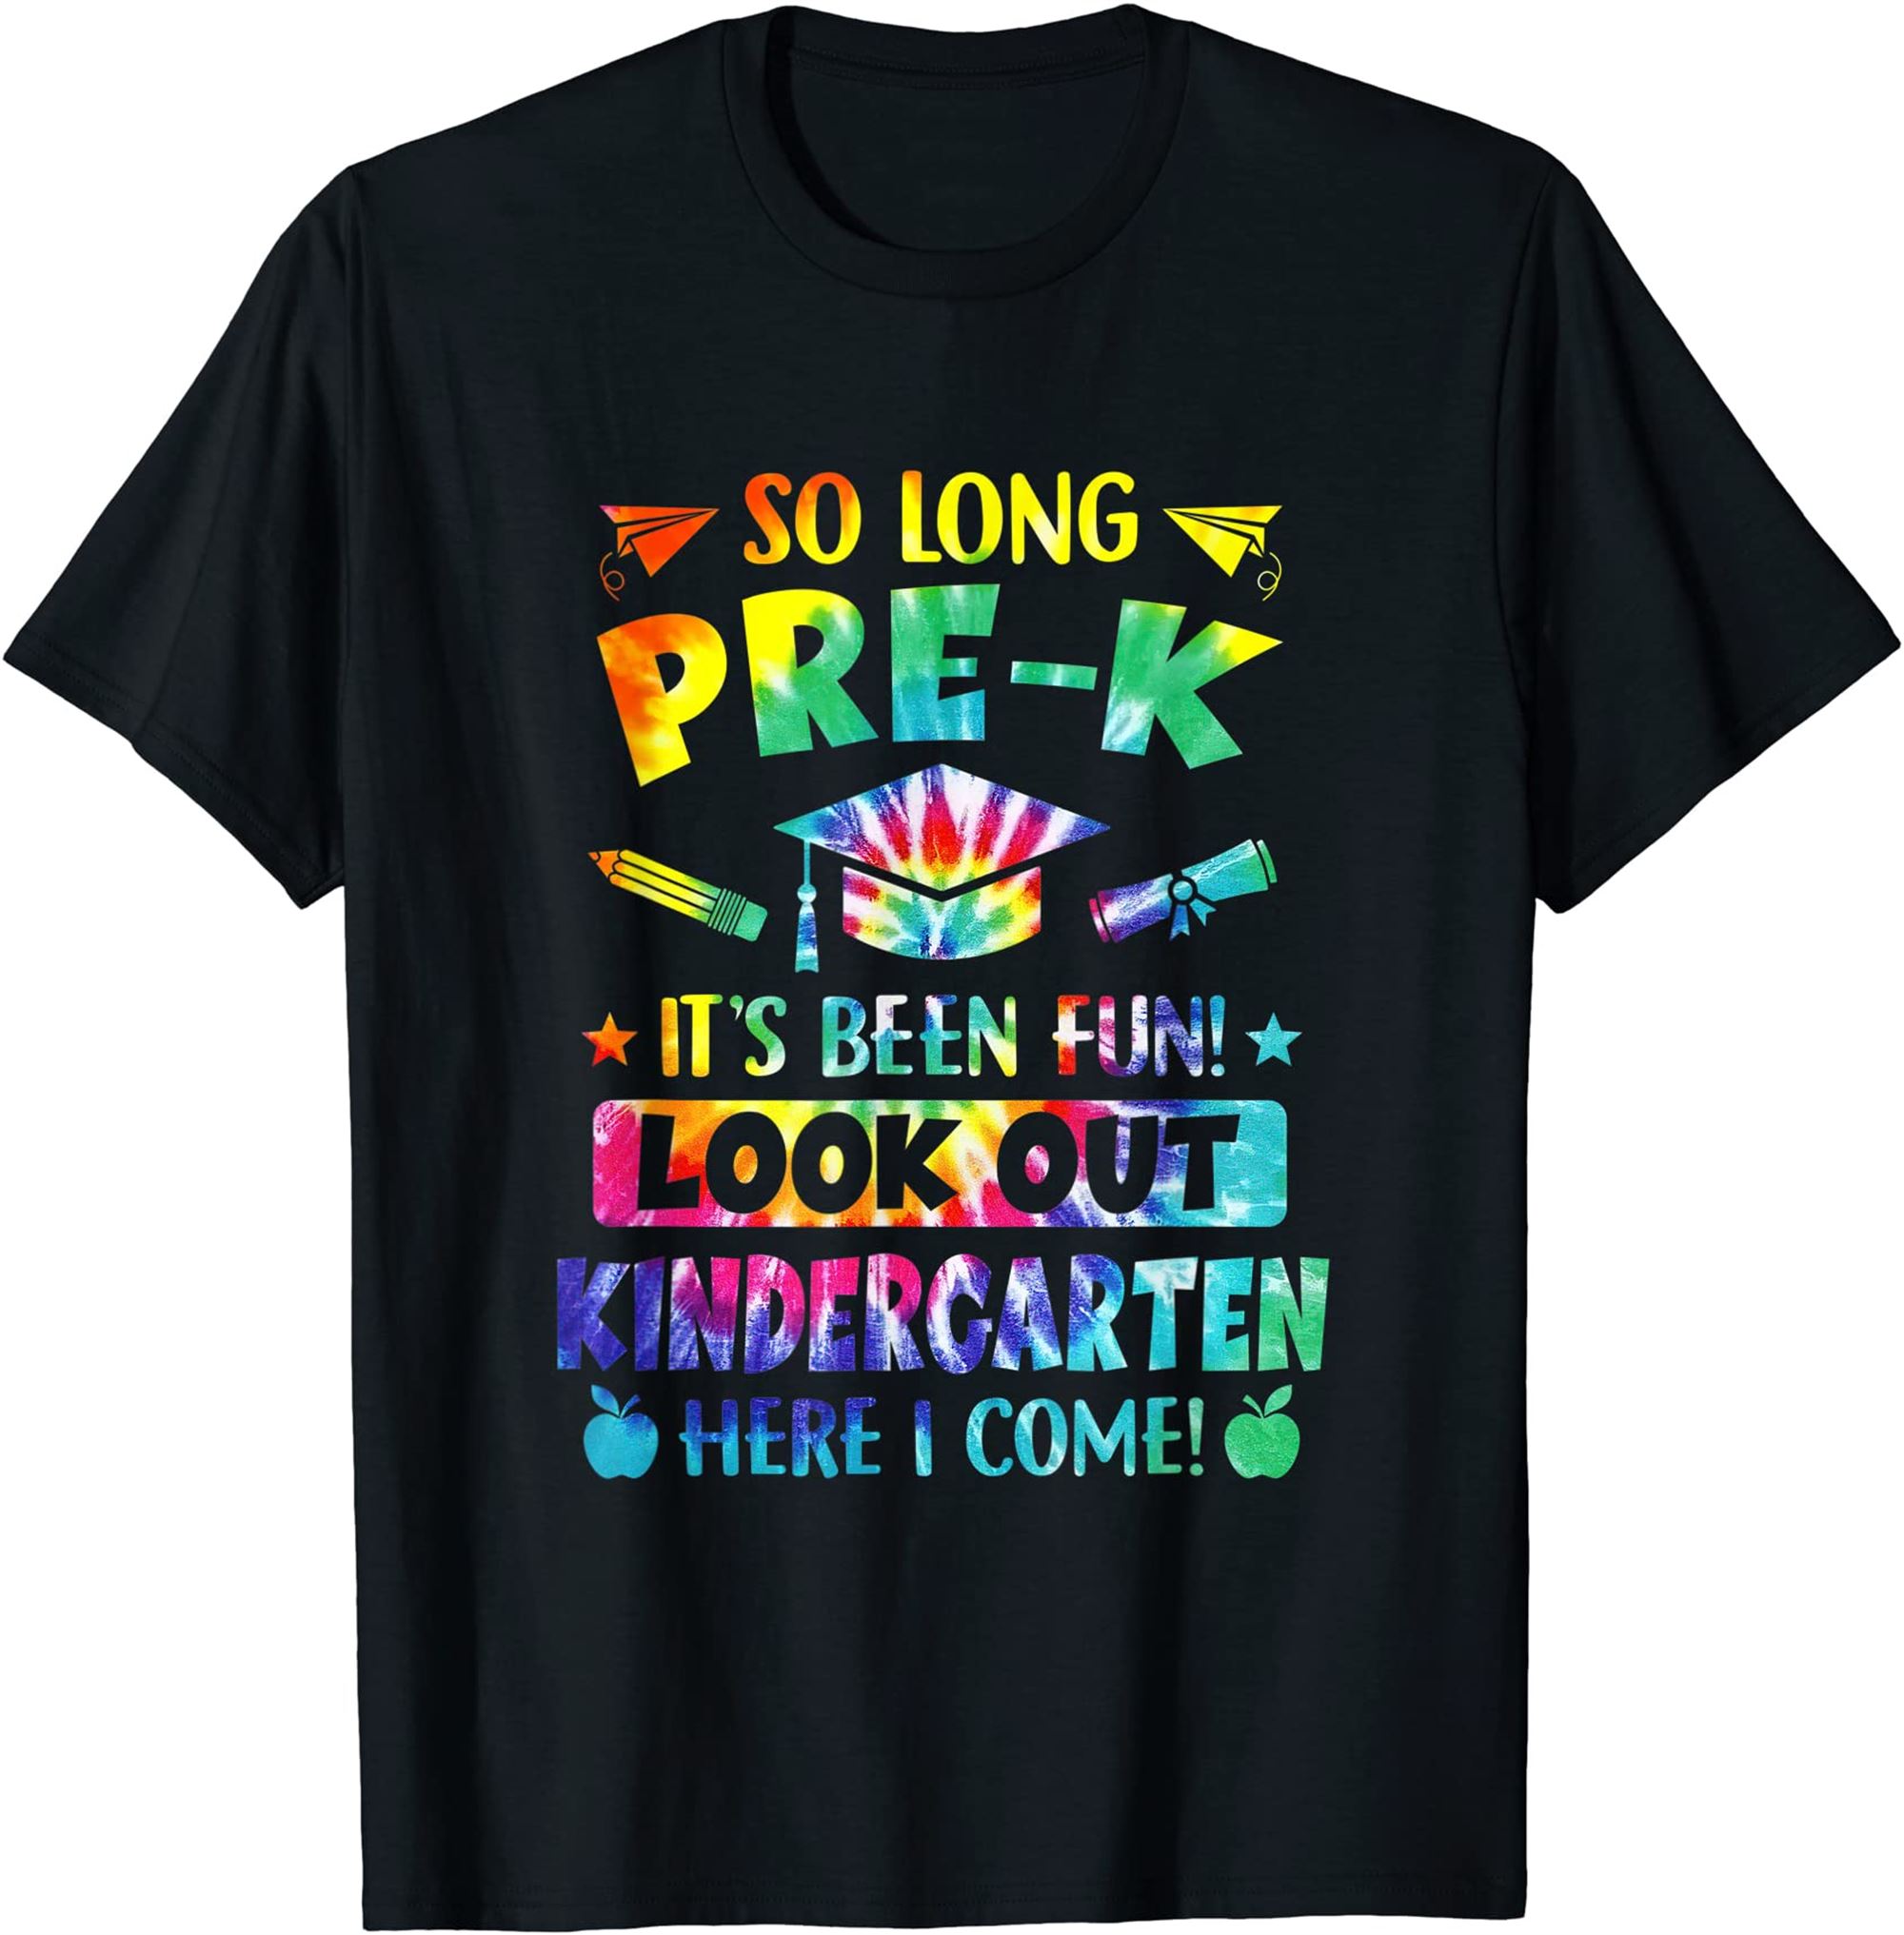 So Long Pre K Kindergarten Here I Come Graduation Tshirt Full Size Up To 5xl